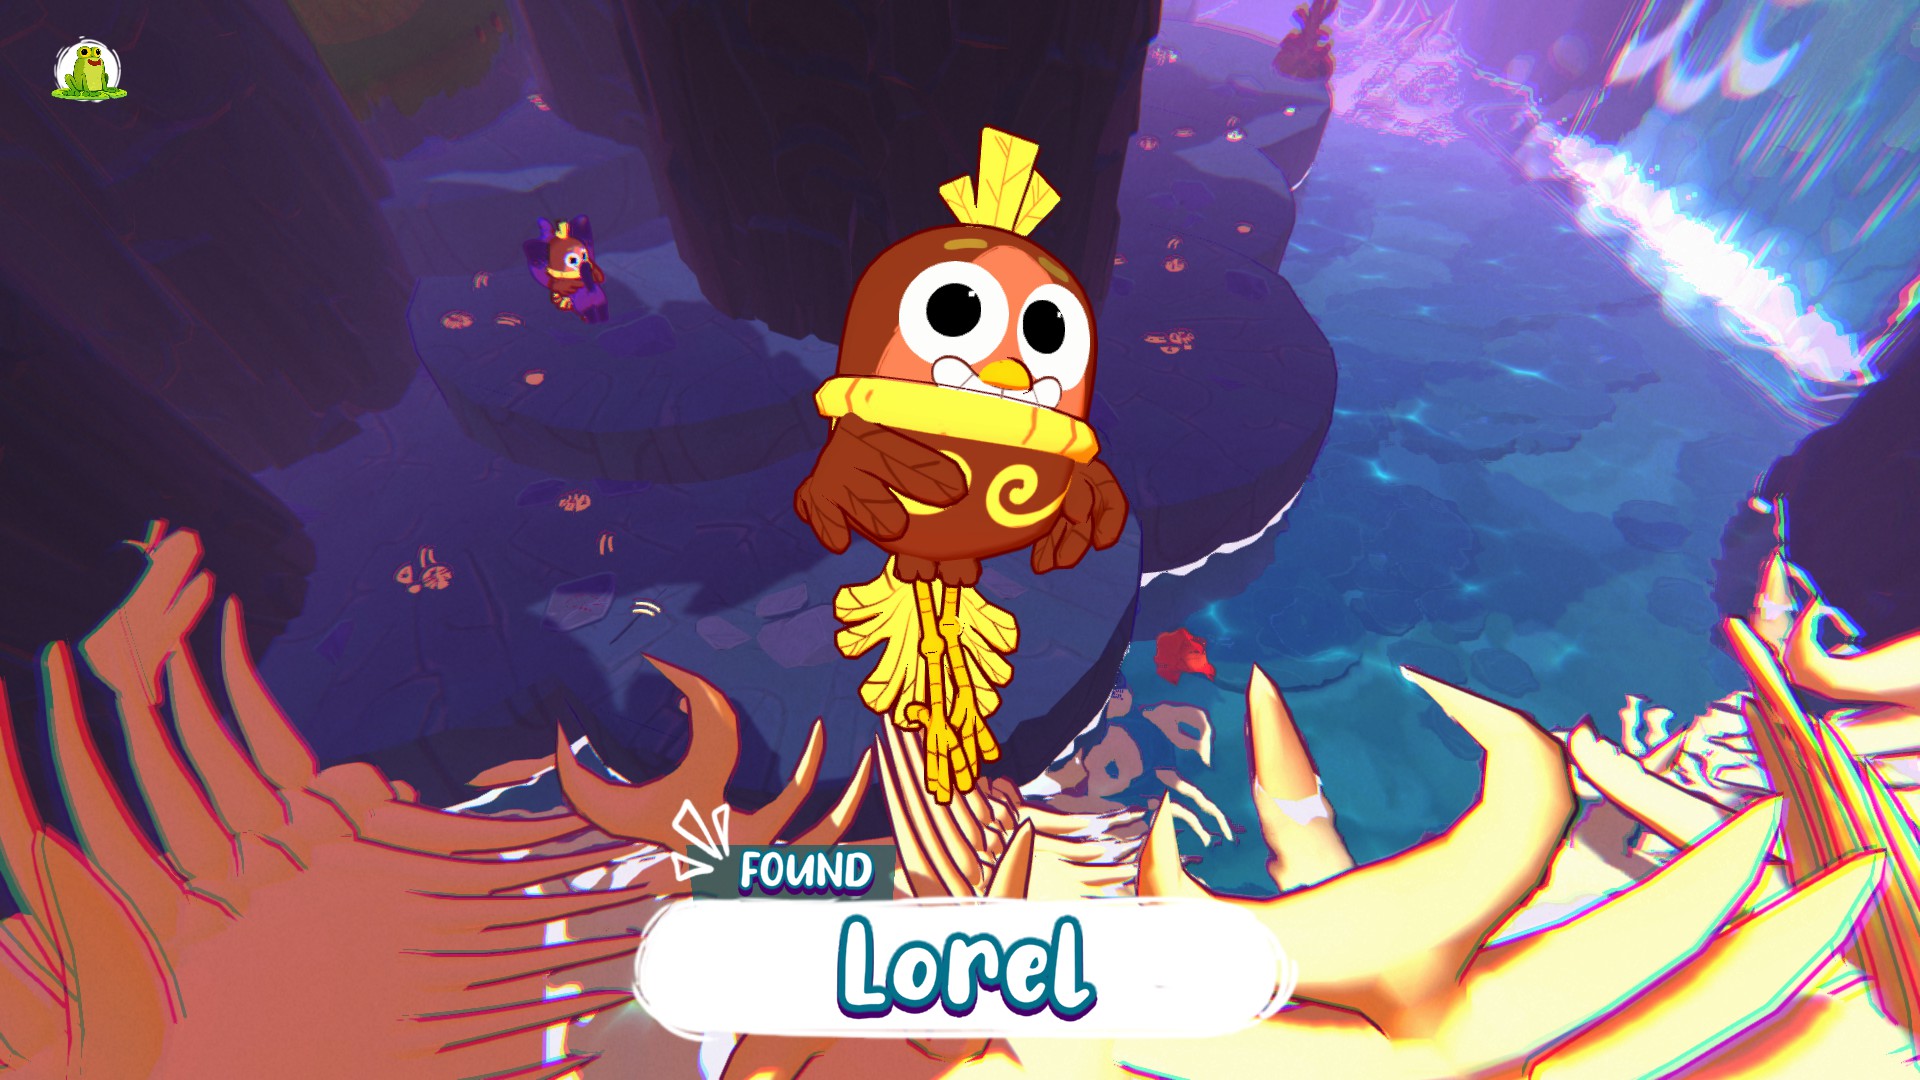 A brown bird with yellow feathers and markings, a river is seen on the right and bones at the bottom. A speech bubble with the name Lorel is visible